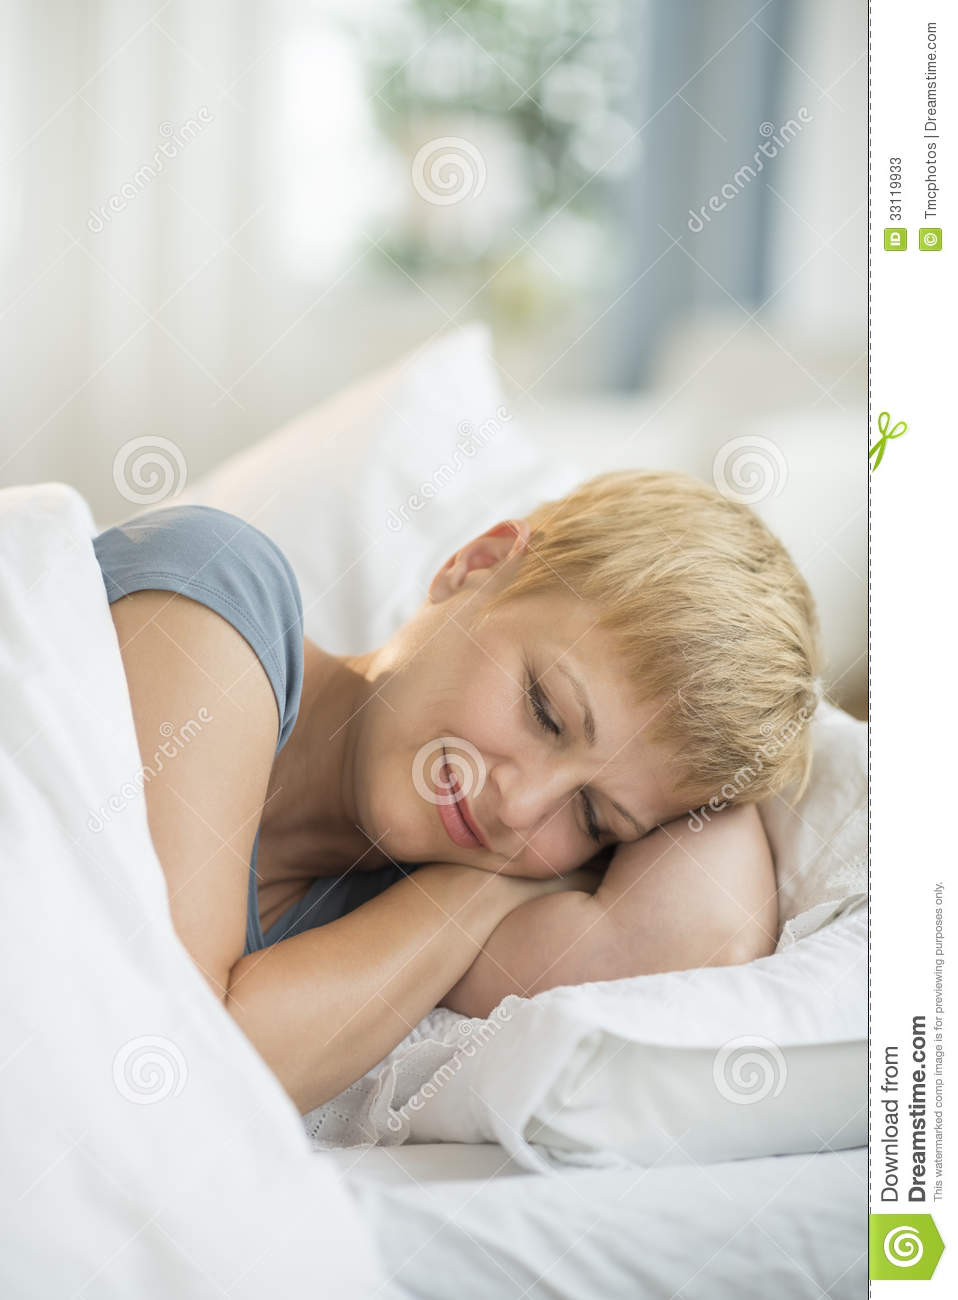 Woman Sleeping In Bed Stock Photos   Image  33119933